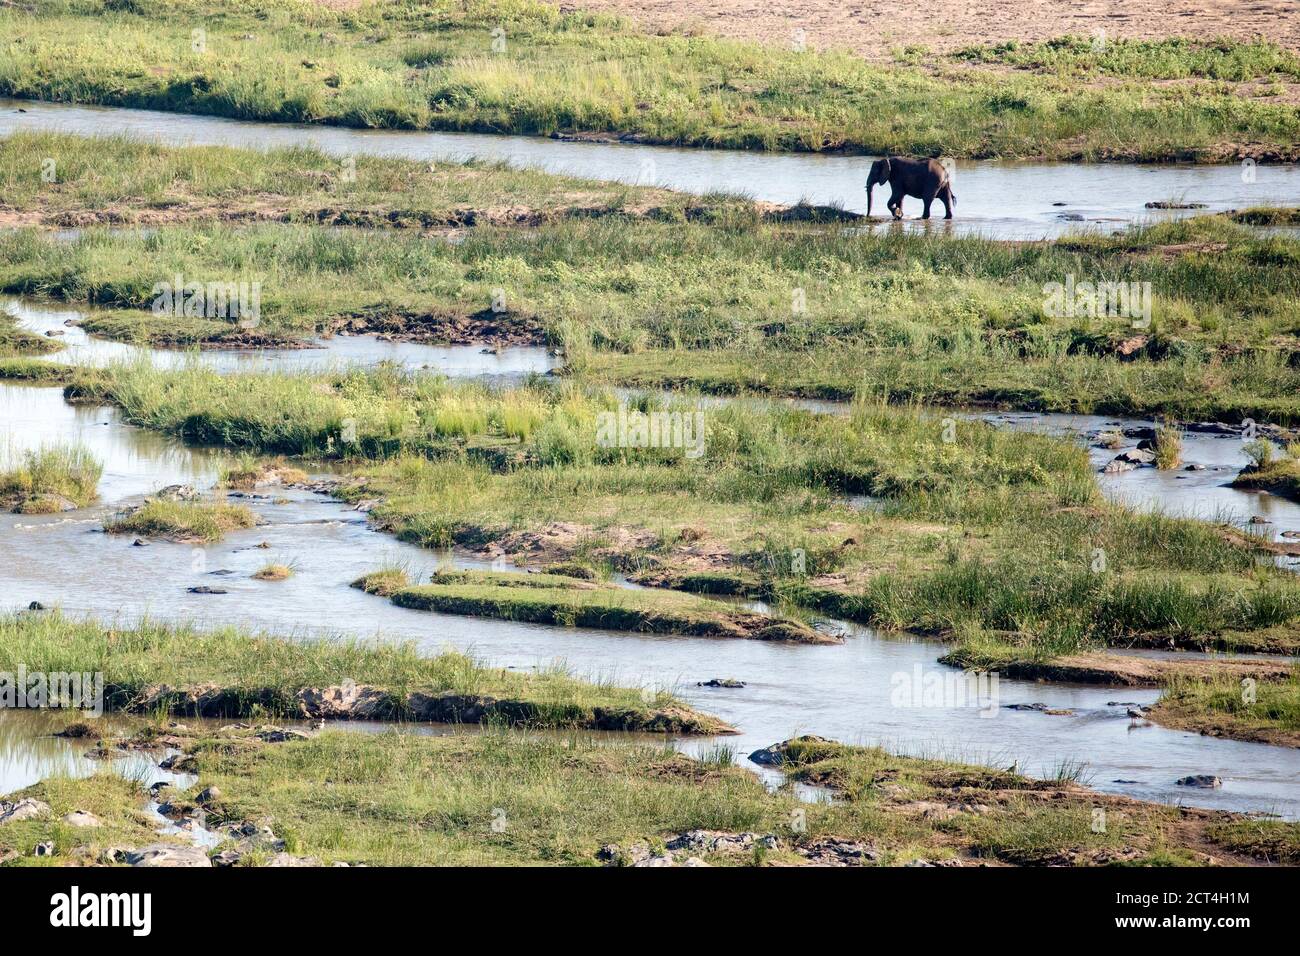 Elephants crossing a river in Kruger National Park, South Africa. Stock Photo